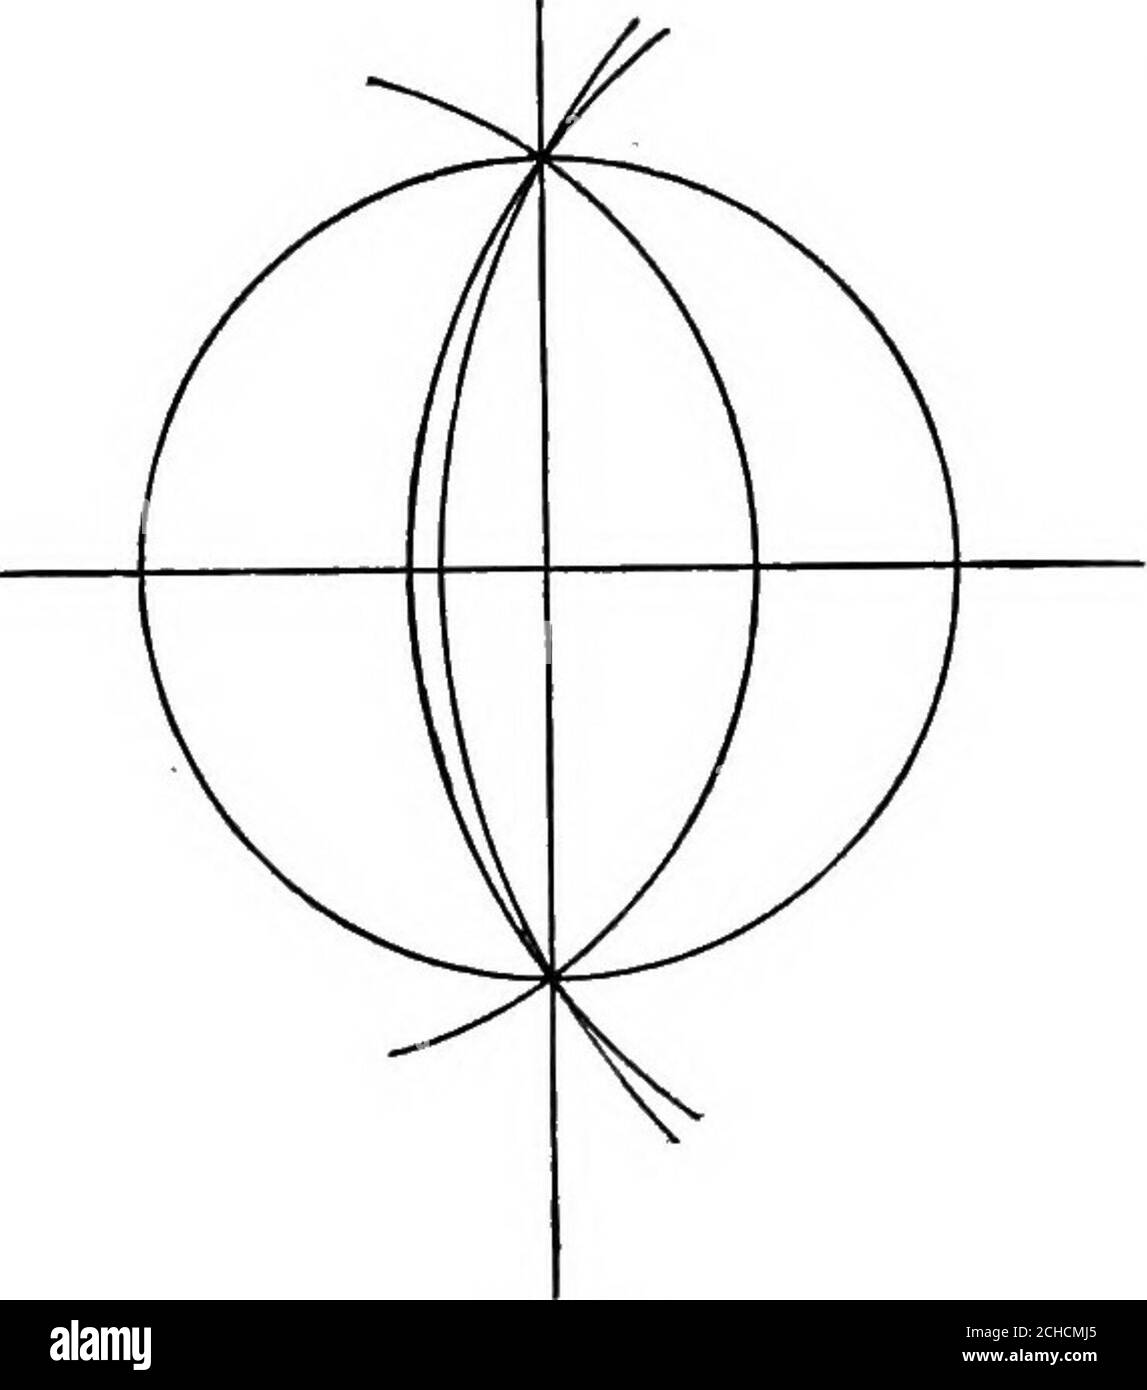 . Algebraic geometry; a new treatise on analytical conic sections . radical axis. Def. Such a system of circles is said to be co-axal. 113. Example i. Find the equation of a system of circles which aZl havethe straight line 3a;-5y=7/or their radical axis, one circle of the systemhaving its centre at the origin and radius i. x + y^-16 + (3x-5y-7) = 0 IB the required equation, where  may haveany value; for it represents a circle passing through the common pointsof the circle x + y-16=0, and the straight line Sx-5y-T = 0. Alsox + y-l6=0 is one of the circles of the system, for this is what thee Stock Photo